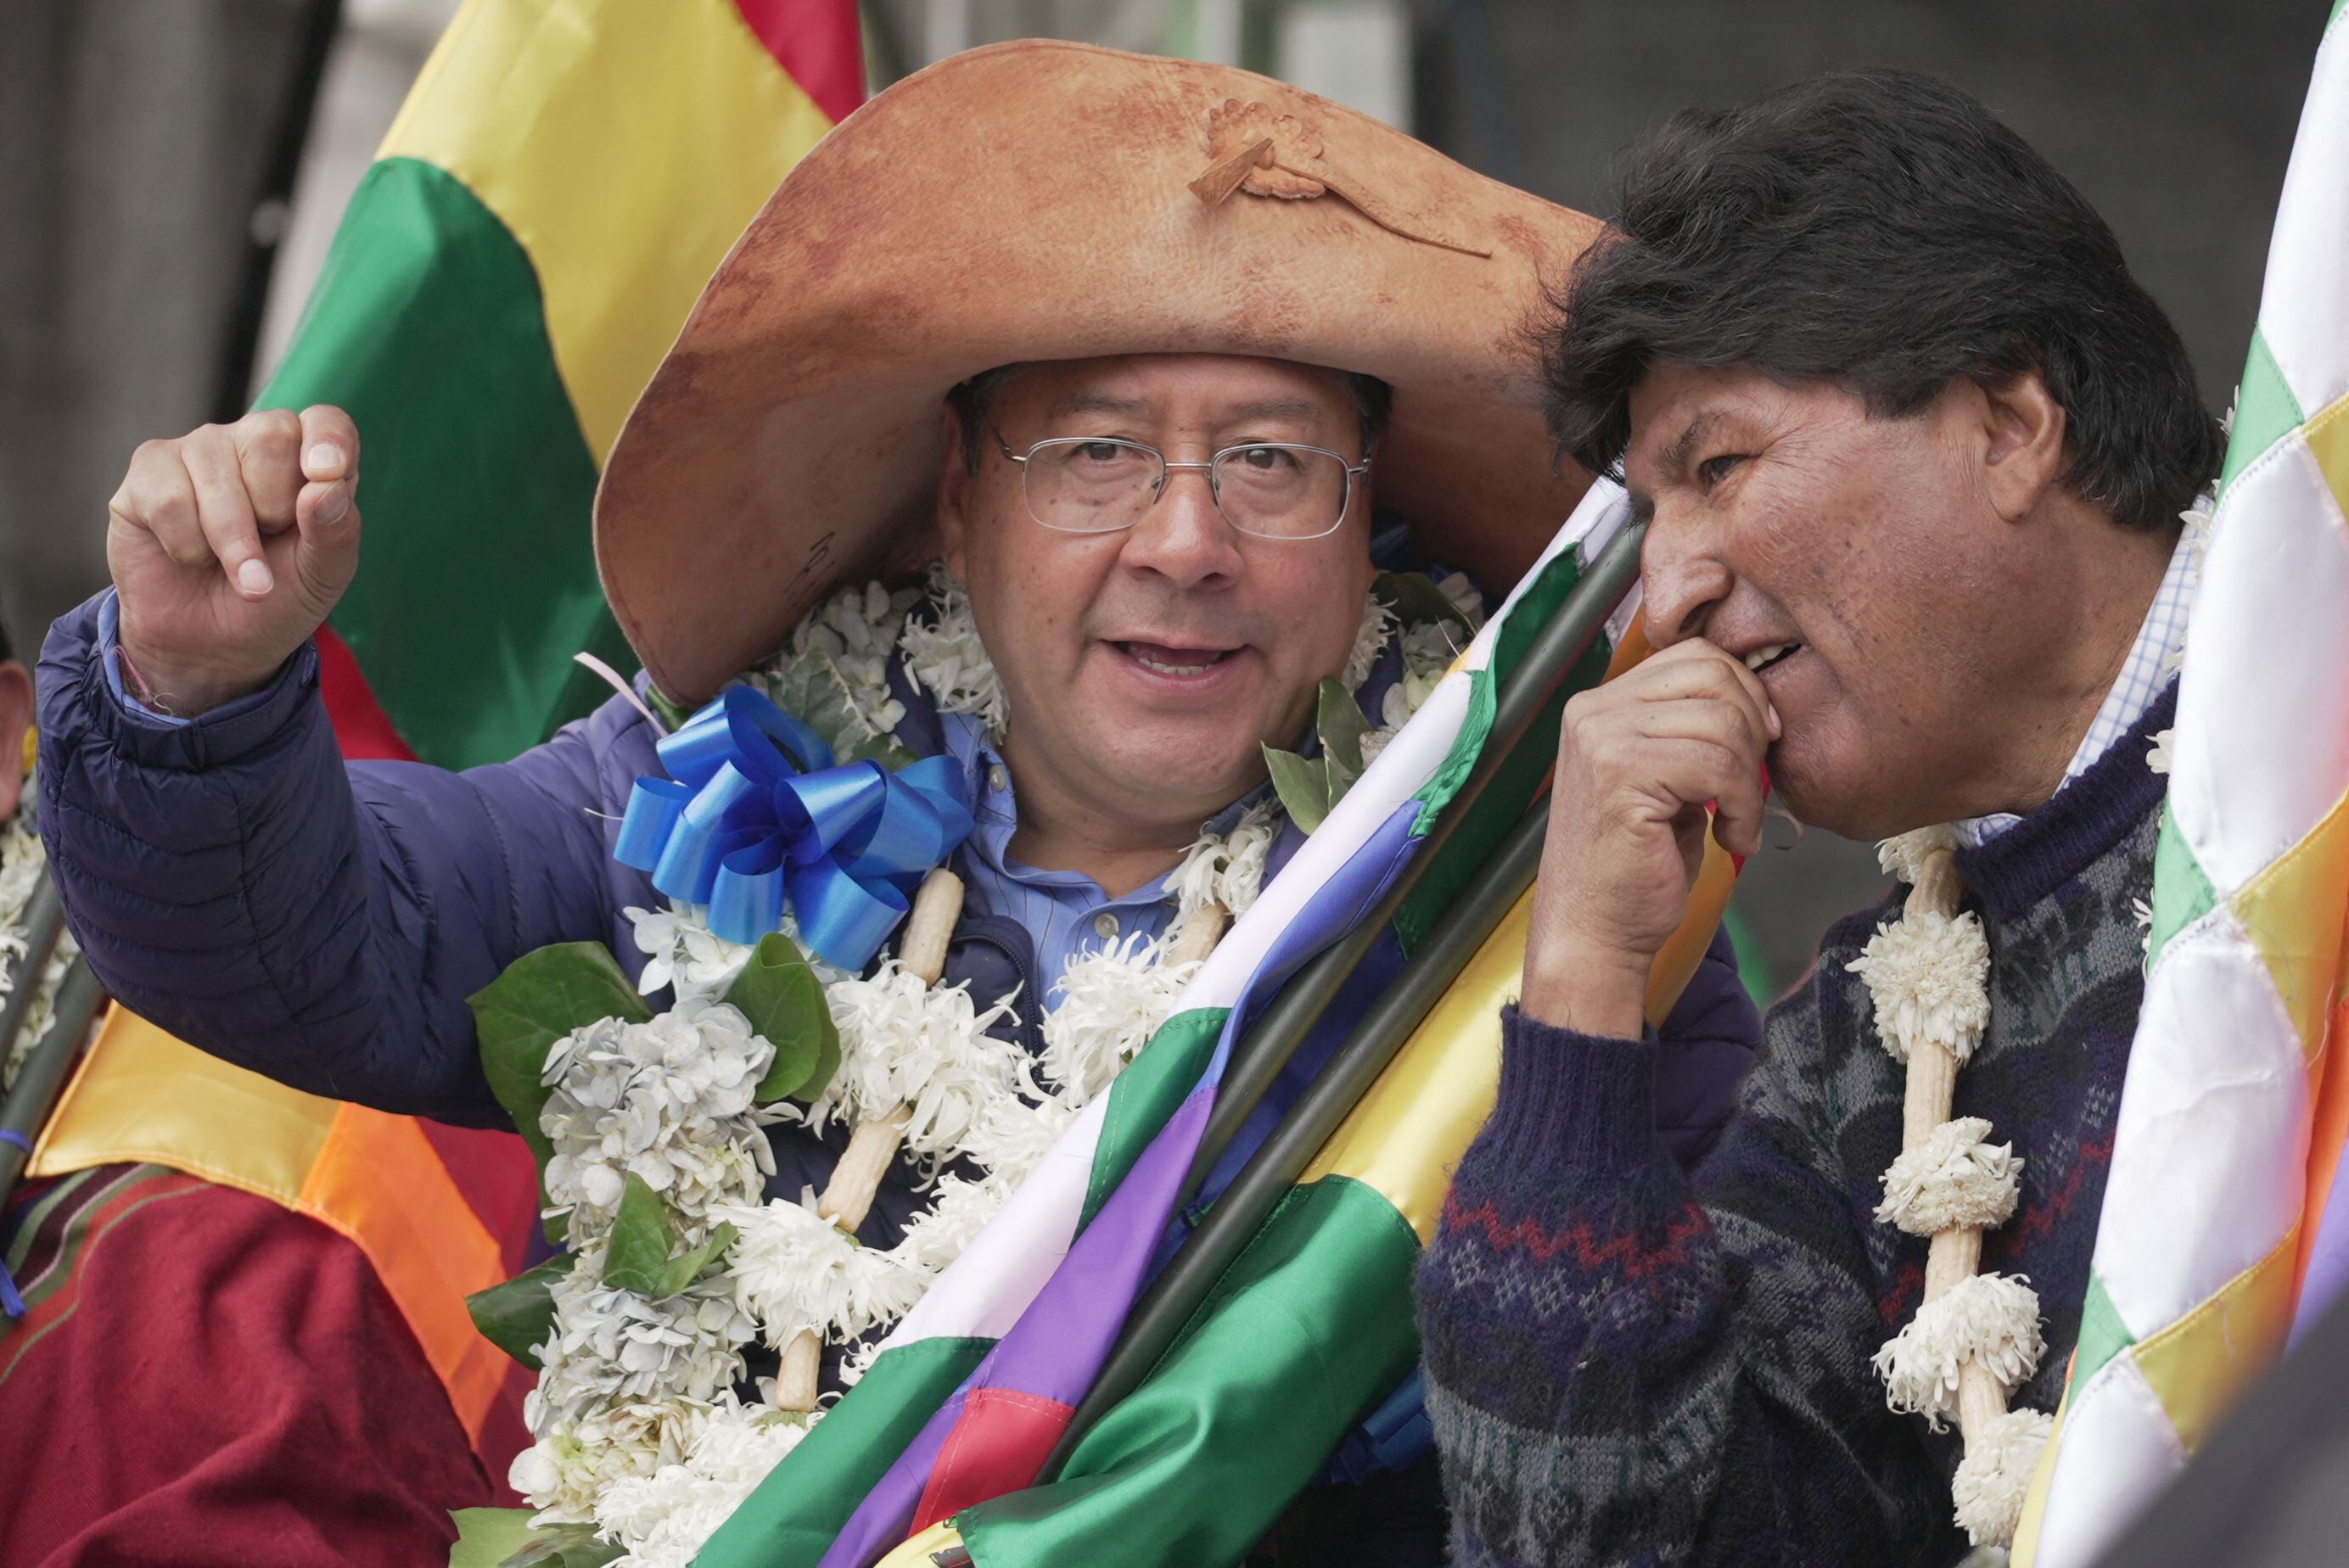 Bolivian President Luis Arce talks with former President Evo Morales during a demonstration in support of the government in La Paz, in November 2021. (Photo by Aizar RALDES / AFP)